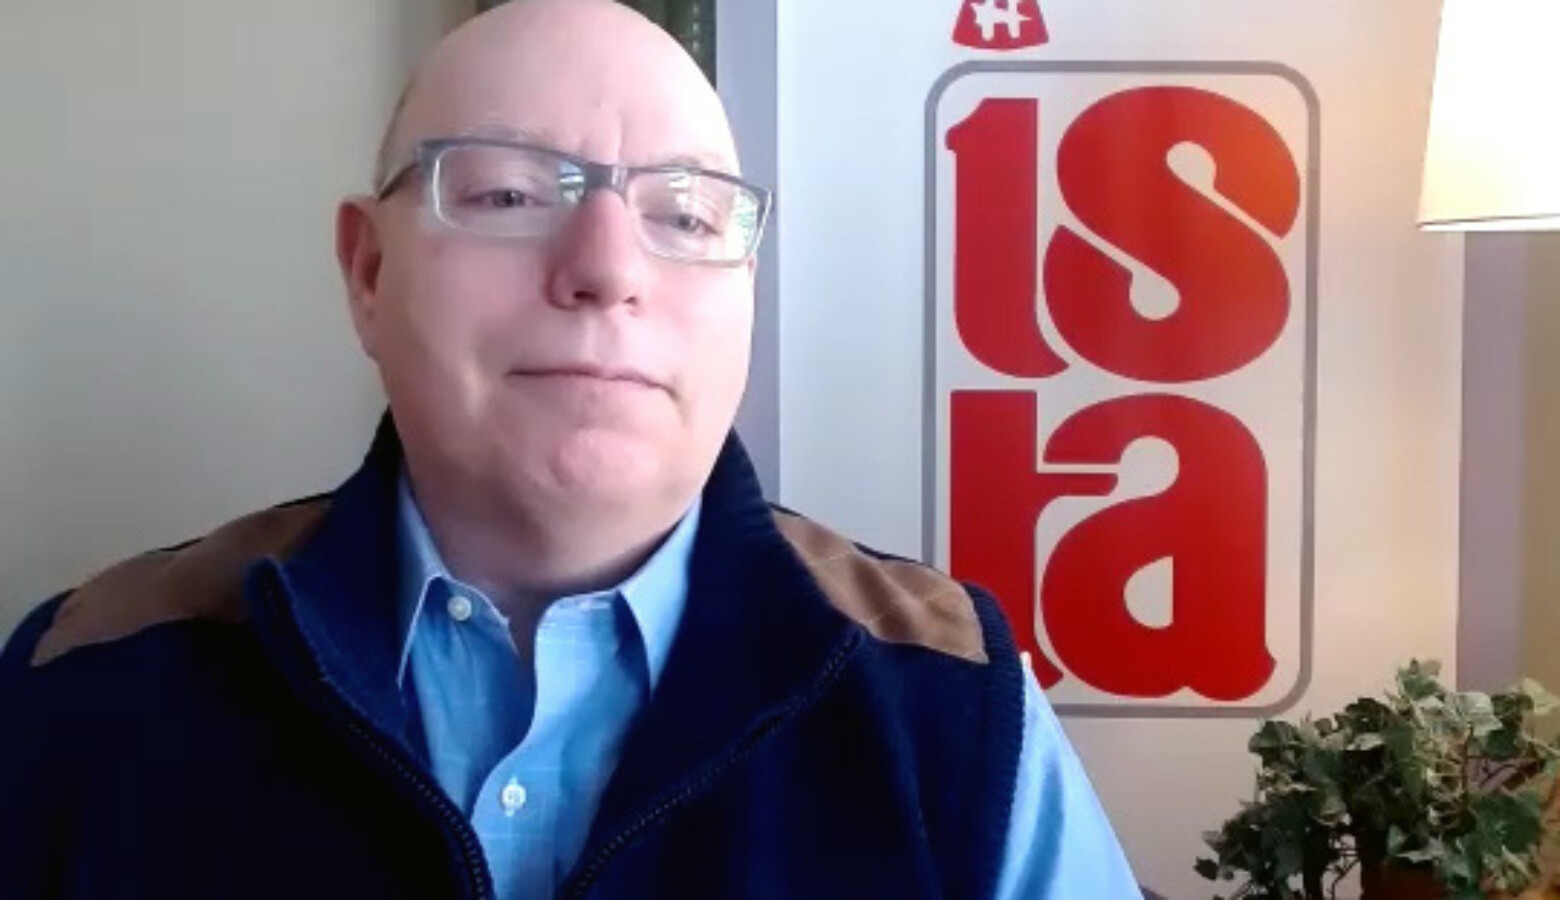 Indiana State Teachers Association President Keith Gambill says local union leaders will continue working with schools to bring more students back into classrooms as educators get vaccinated against COVID-19. (Screenshot of Zoom call)